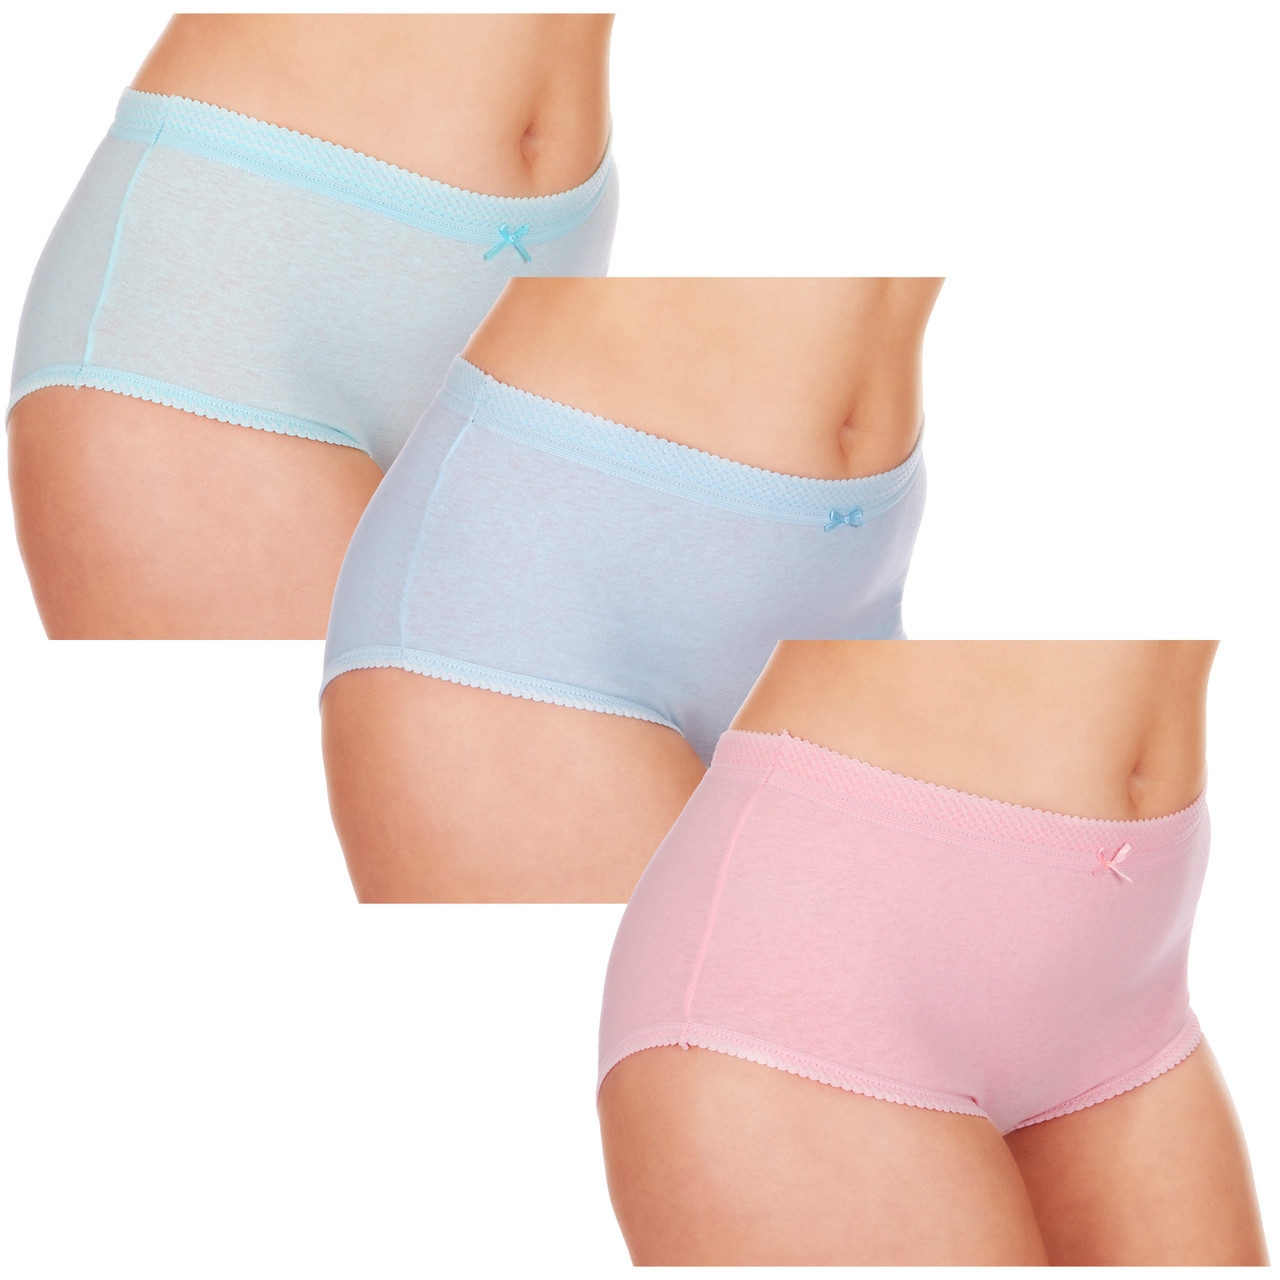 Womens 3 Pairs Plain Full Briefs Knickers Underwear Plus Size  Blue/Turquoise/Pink